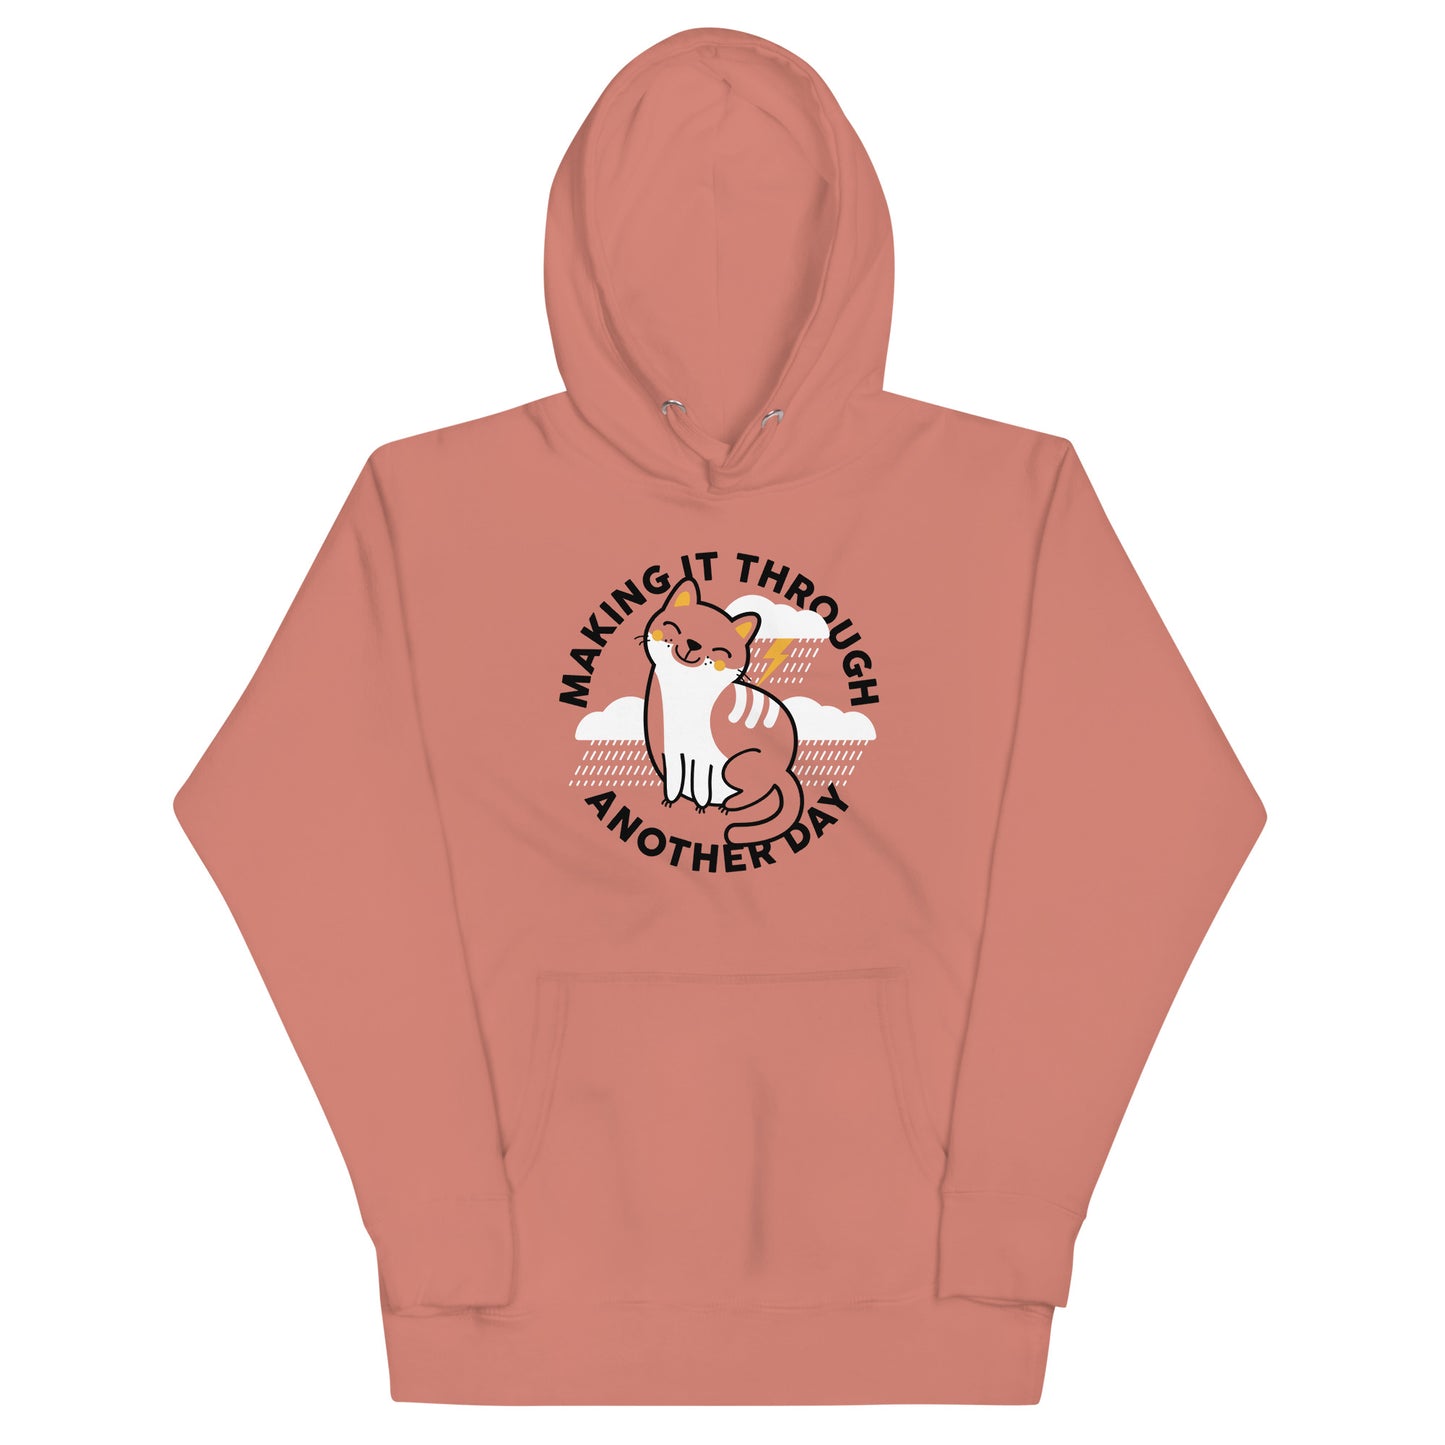 Making It Through Another Day Unisex Hoodie